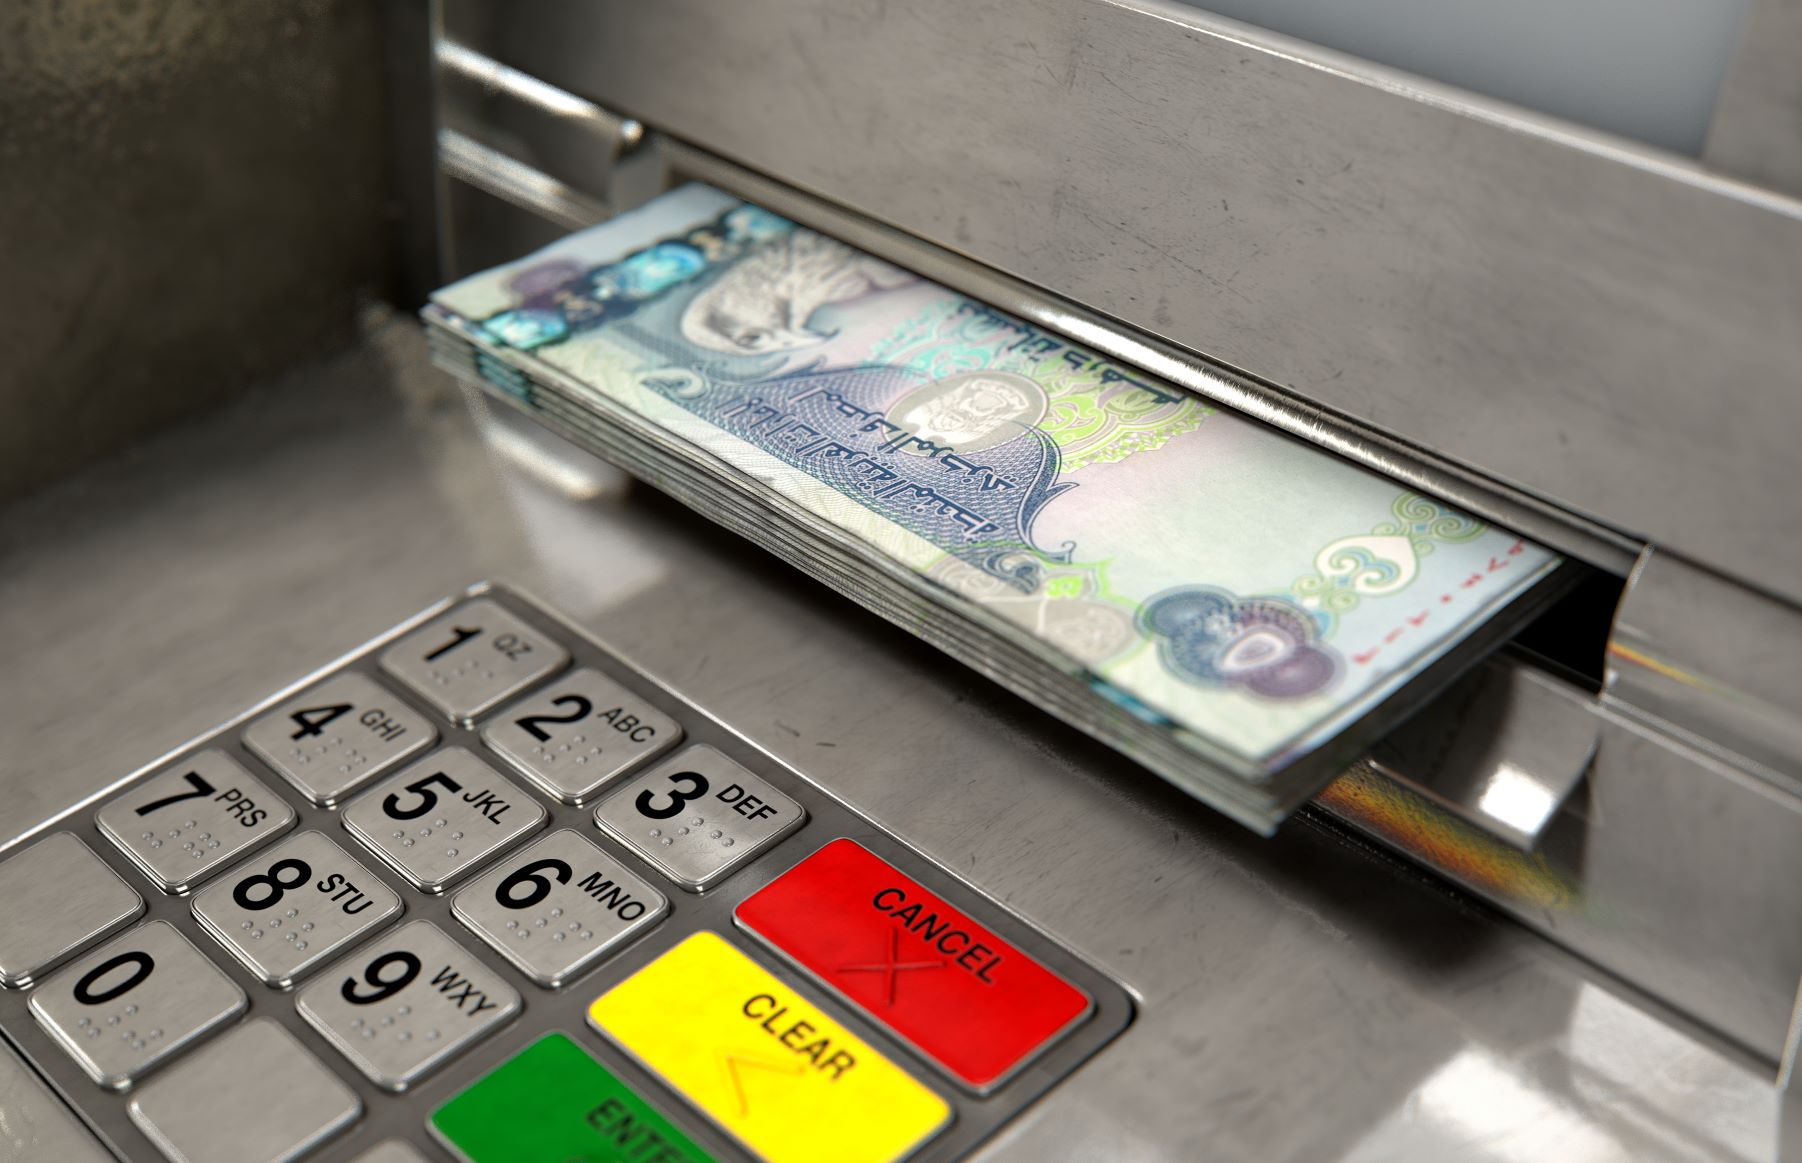 A closeup view of an ATM at a bank in the UAE  with Dubai dirham banknotes being withdrawn from the cash slot to get car finance for private sale.